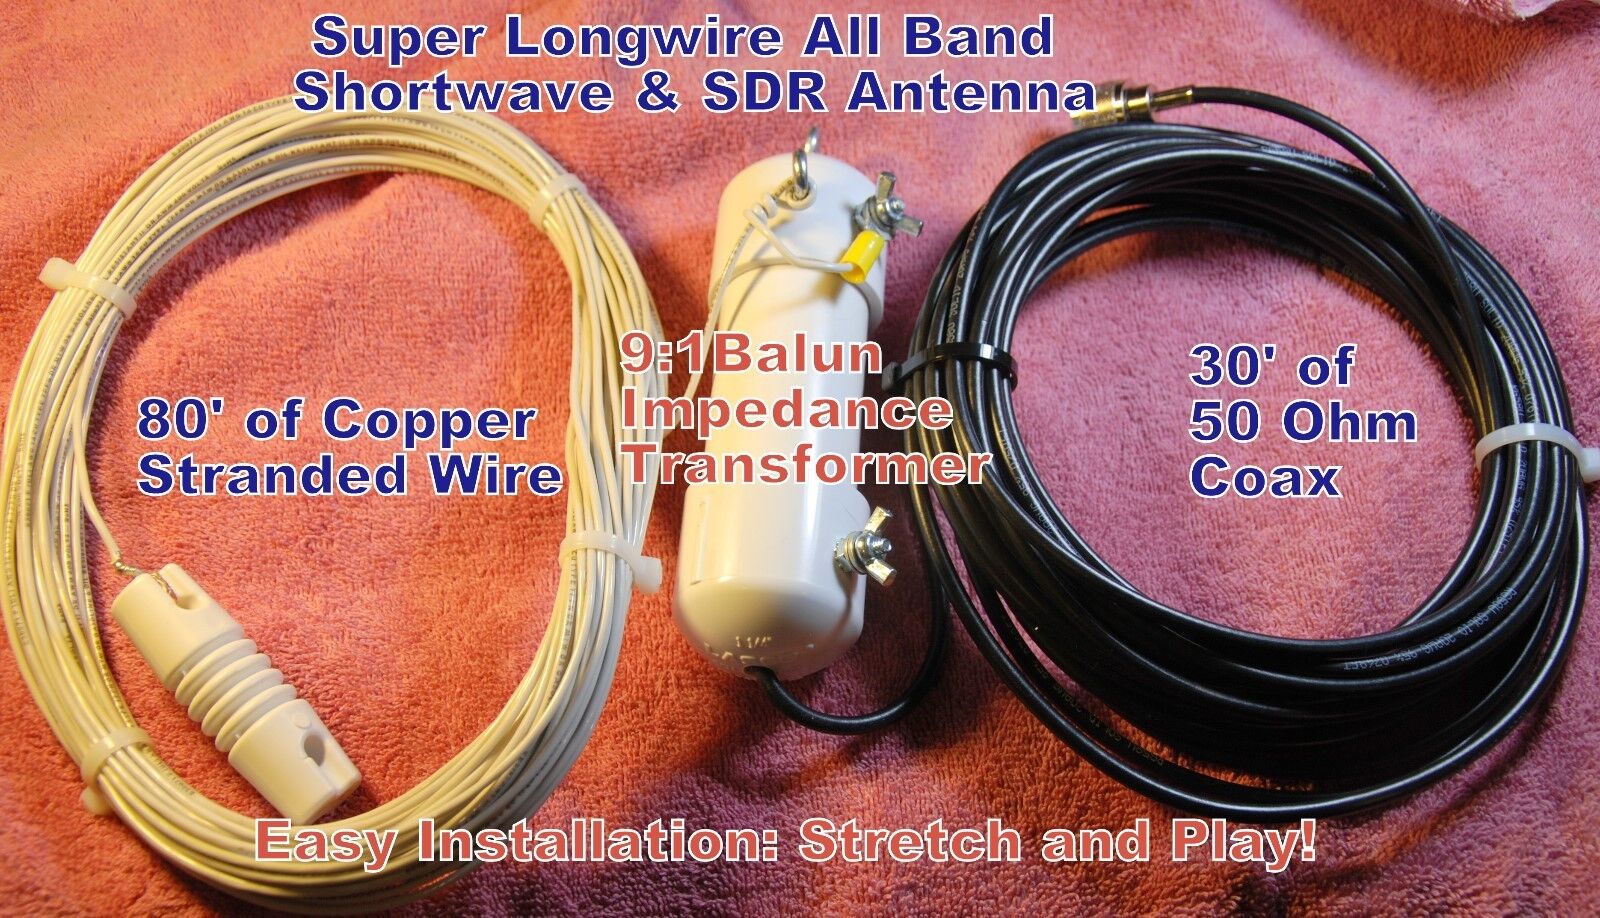  SUPER LONGWIRE 80' SWL  ANTENNA 9:1 BALUN + GROUND CONNECTION 30'COAX 